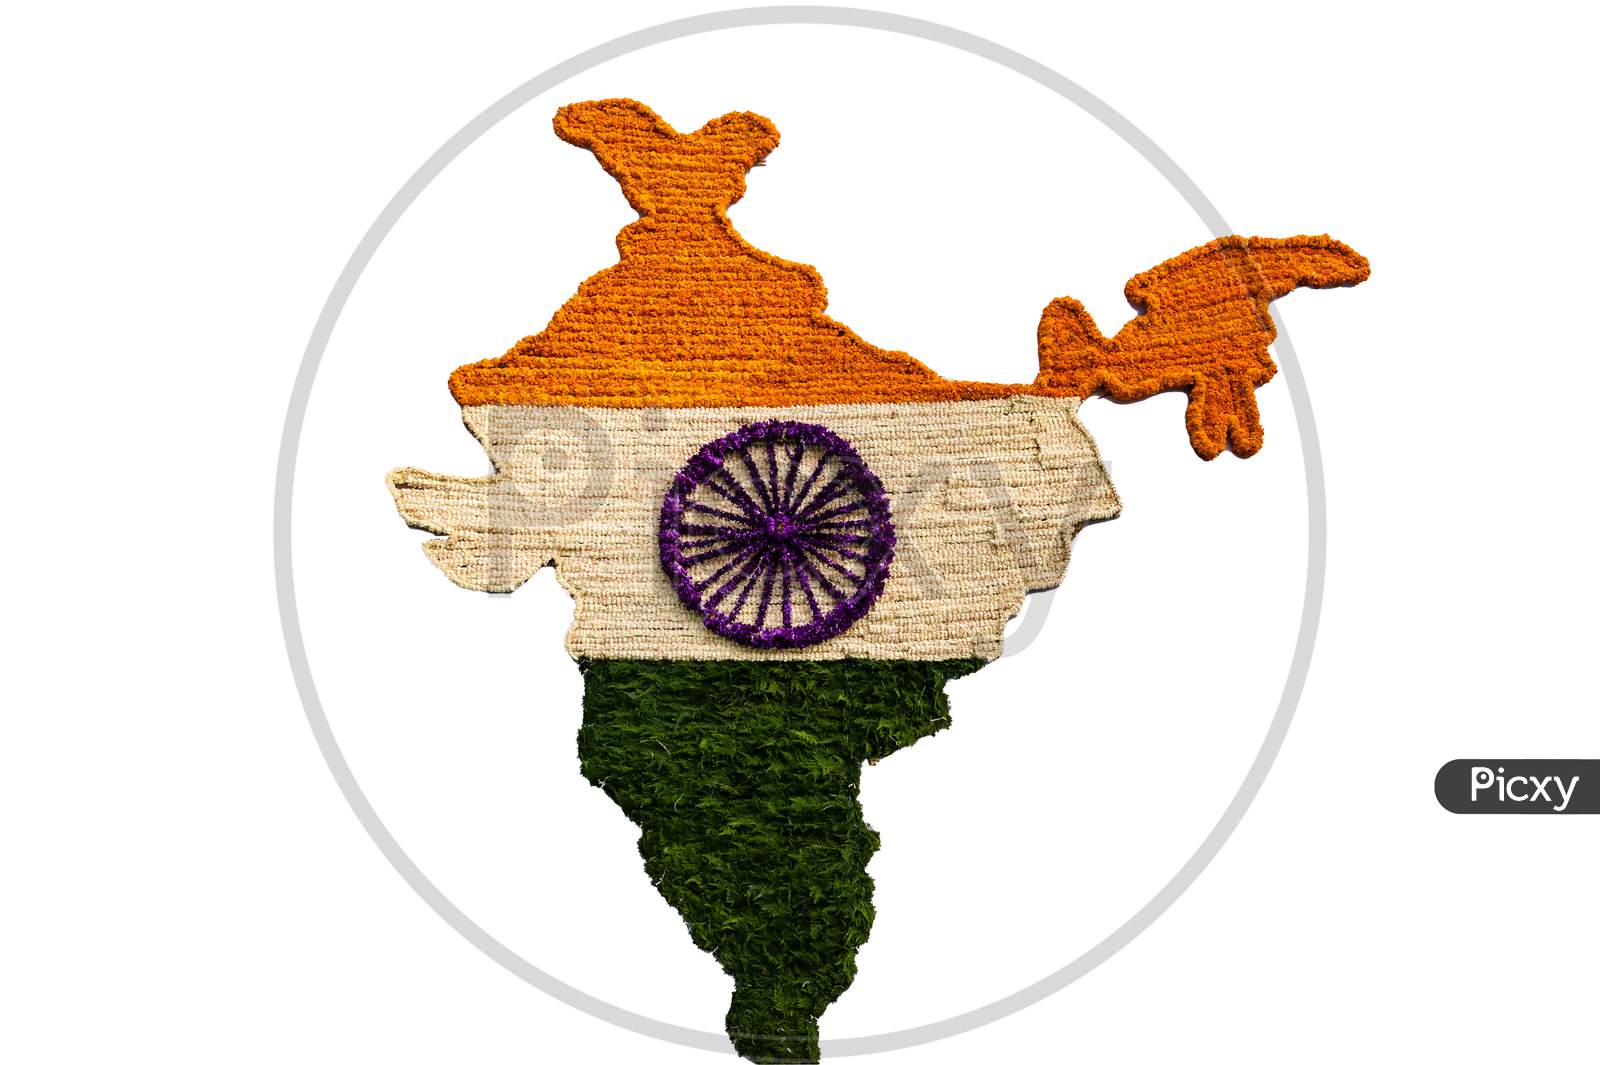 Indian map made of tricolor flowers on cloth on the occasion of Republic day.